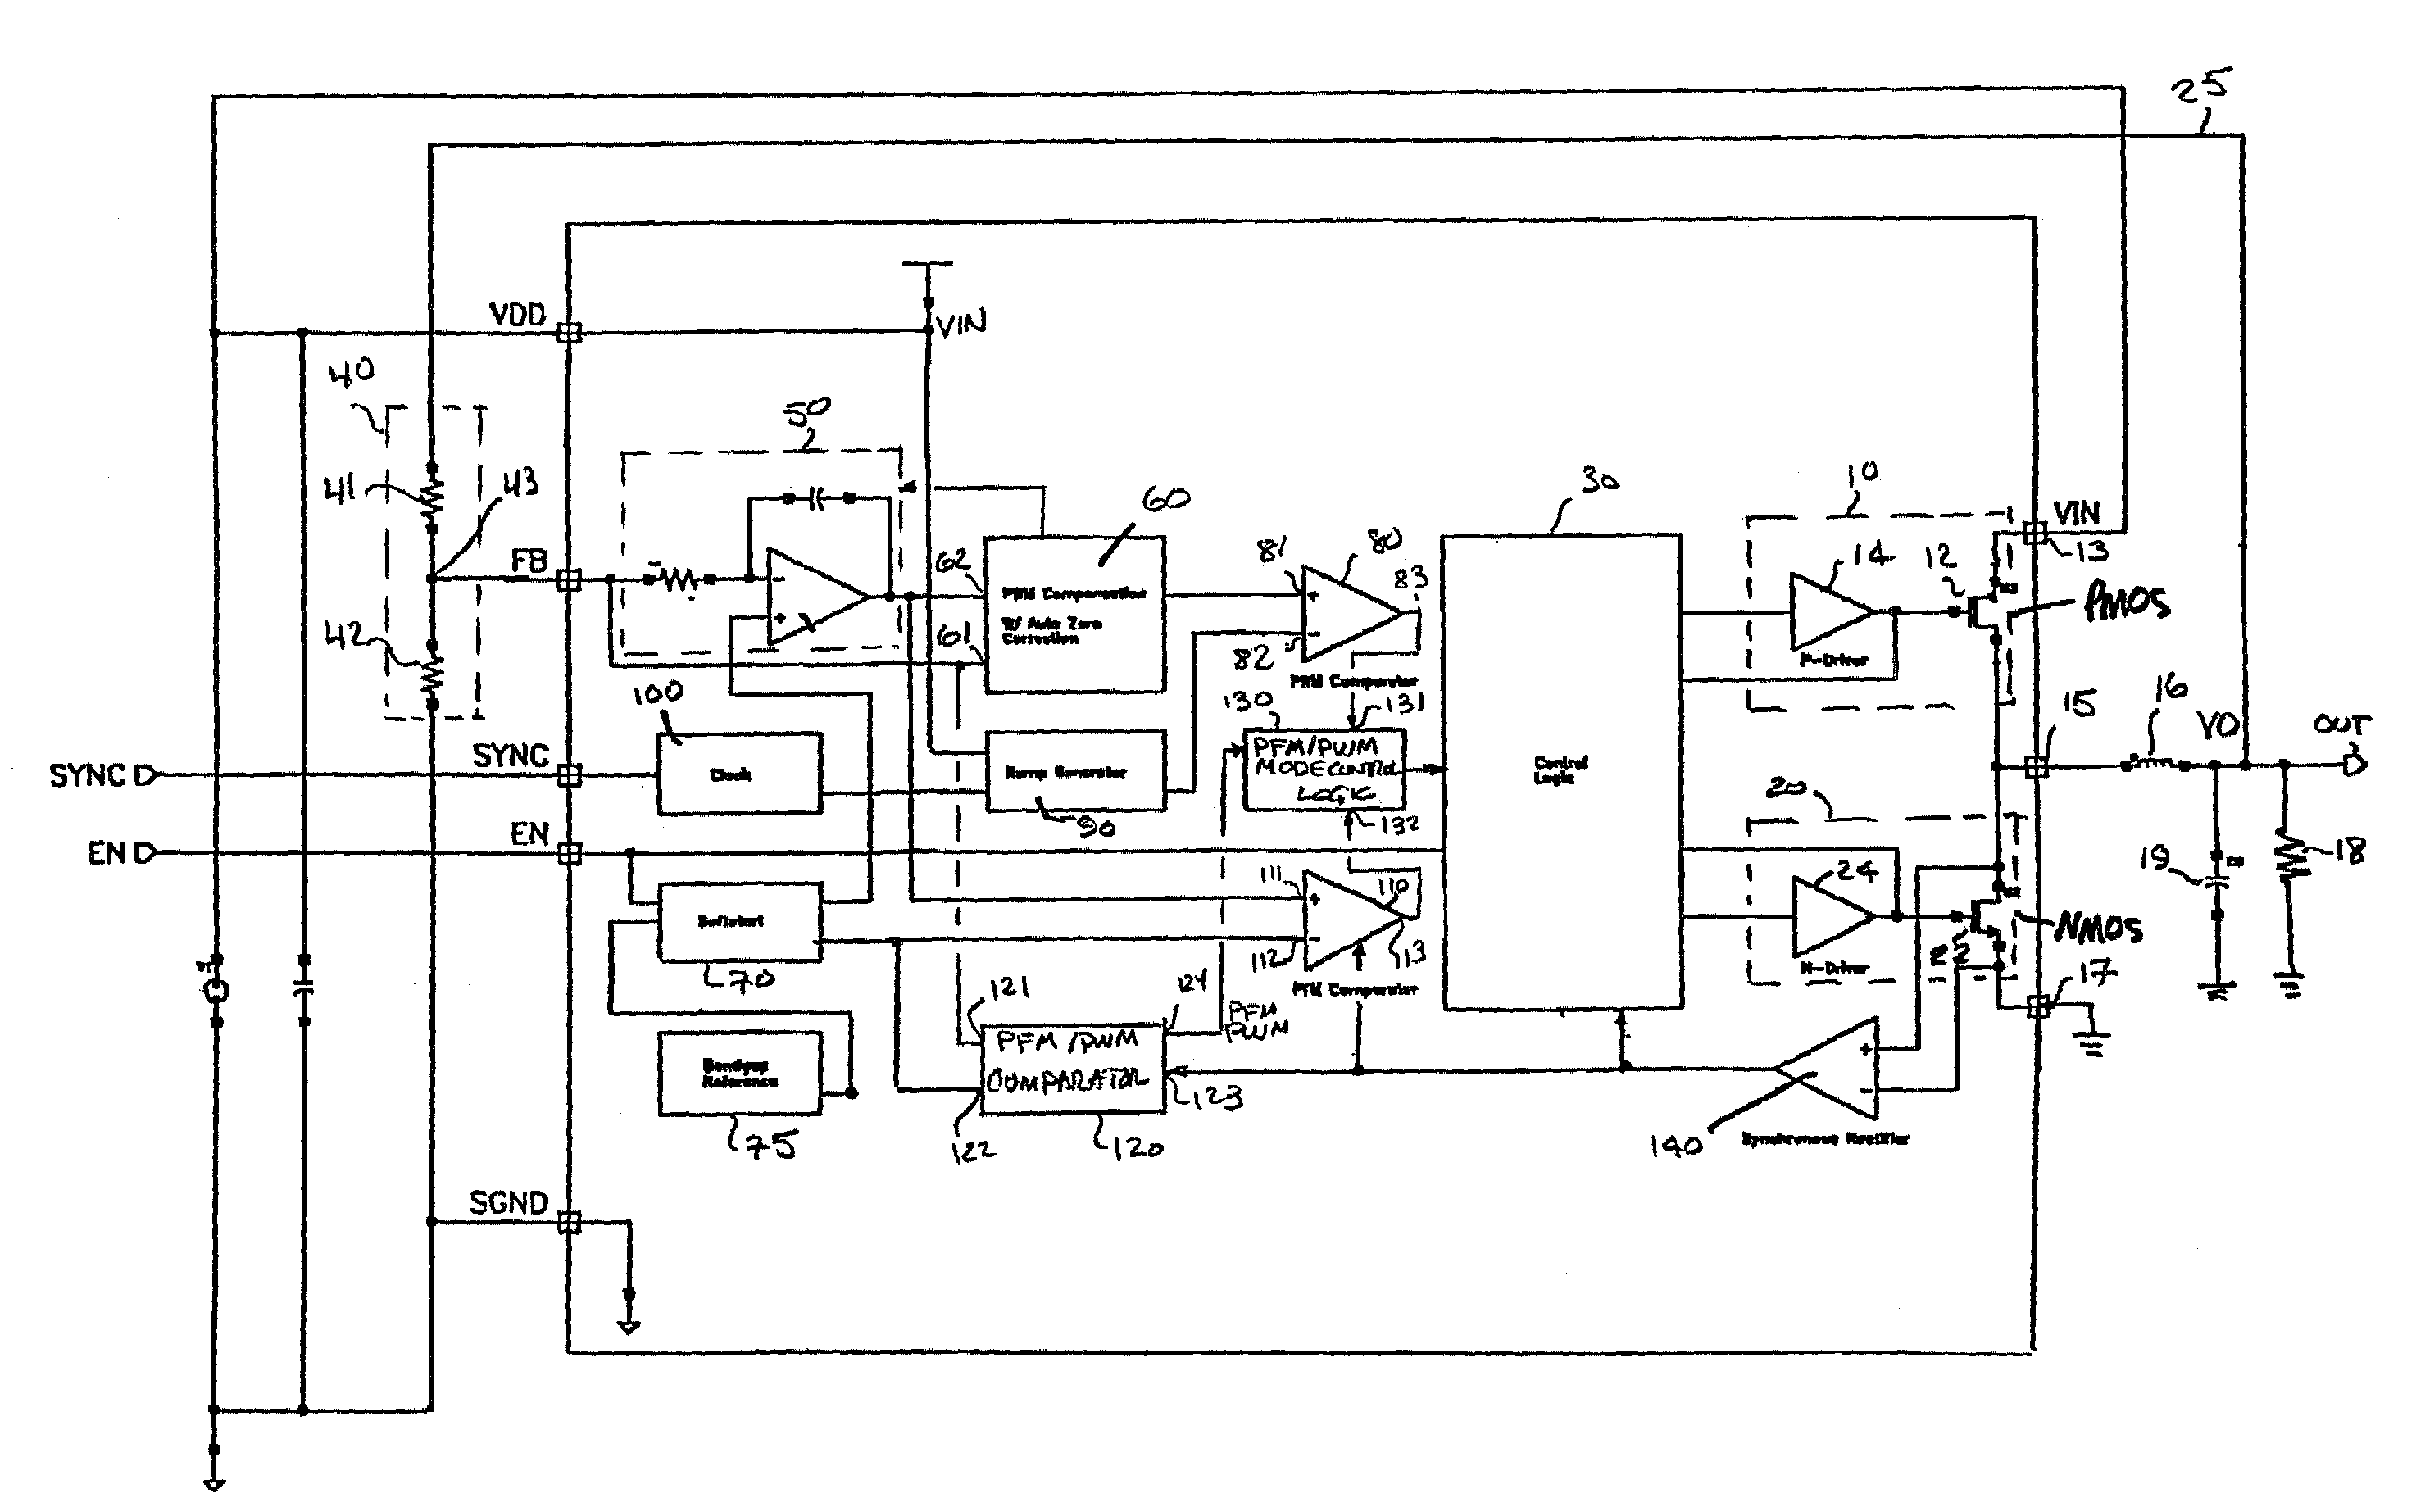 PFM-PWM DC-DC converter providing DC offset correction to PWM error amplifier and equalizing regulated voltage conditions when transitioning between PFM and PWM modes